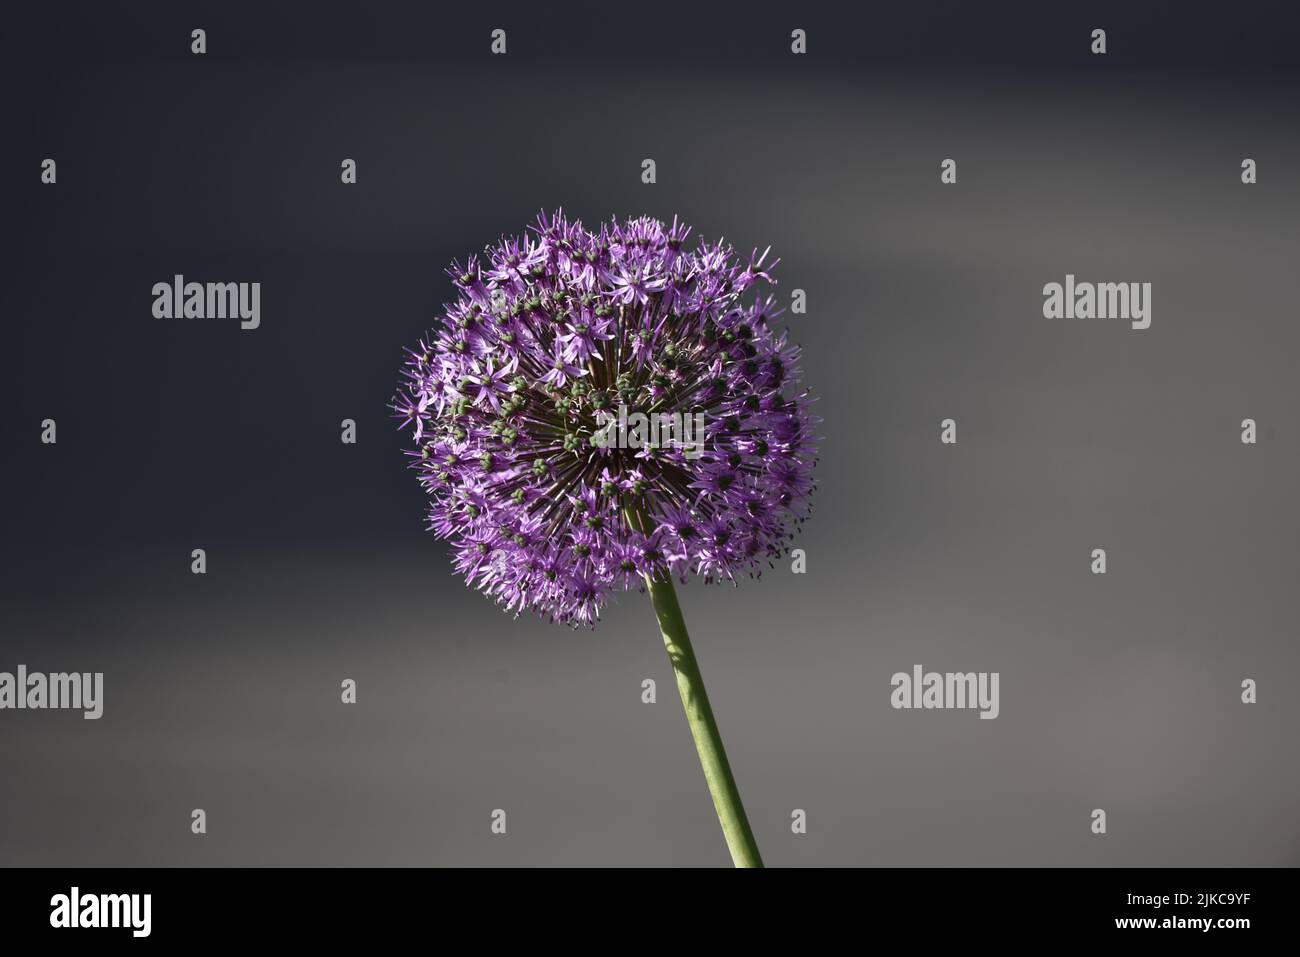 Close-Up Image of a Sunlit Purple Allium Flowerhead against a Plain Grey Background with Copy Space to Left and Right, taken in the UK in June Stock Photo